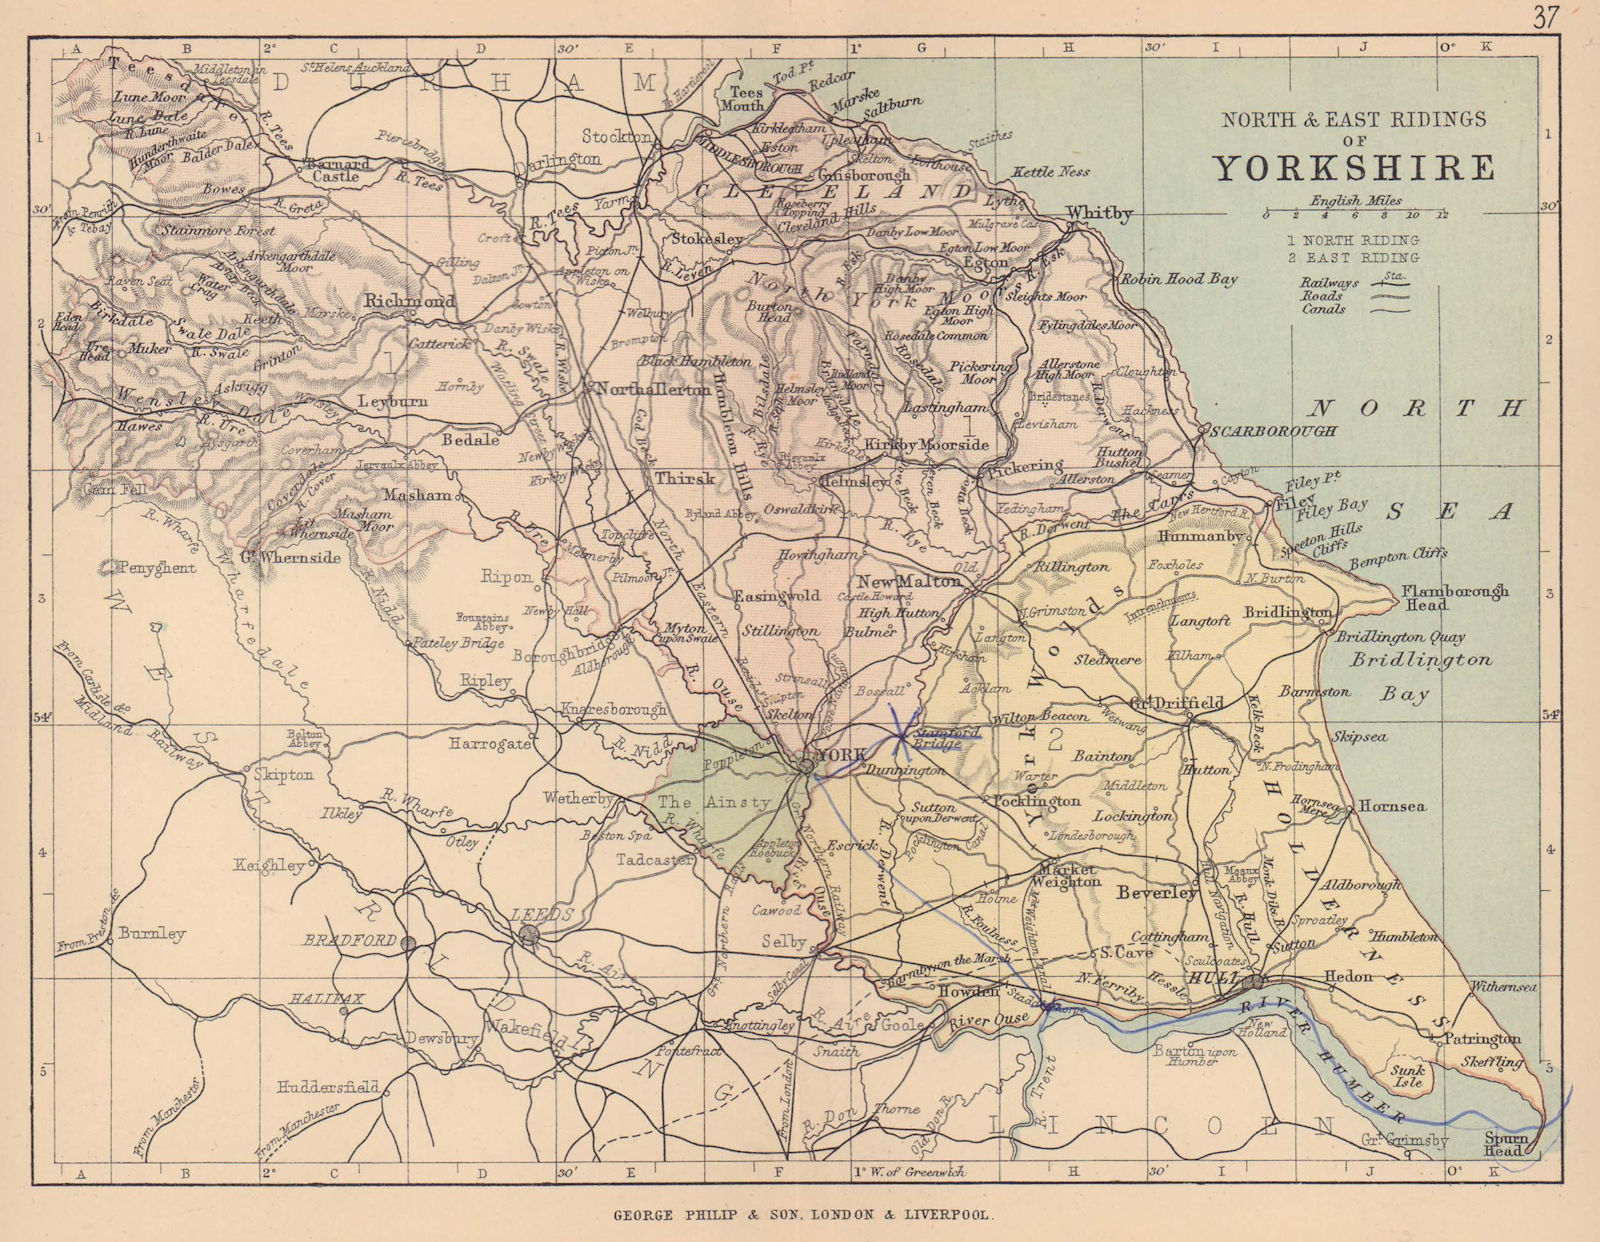 YORKSHIRE NORTH & EAST RIDINGS. County map. Railways constituencies. PHILIP 1885